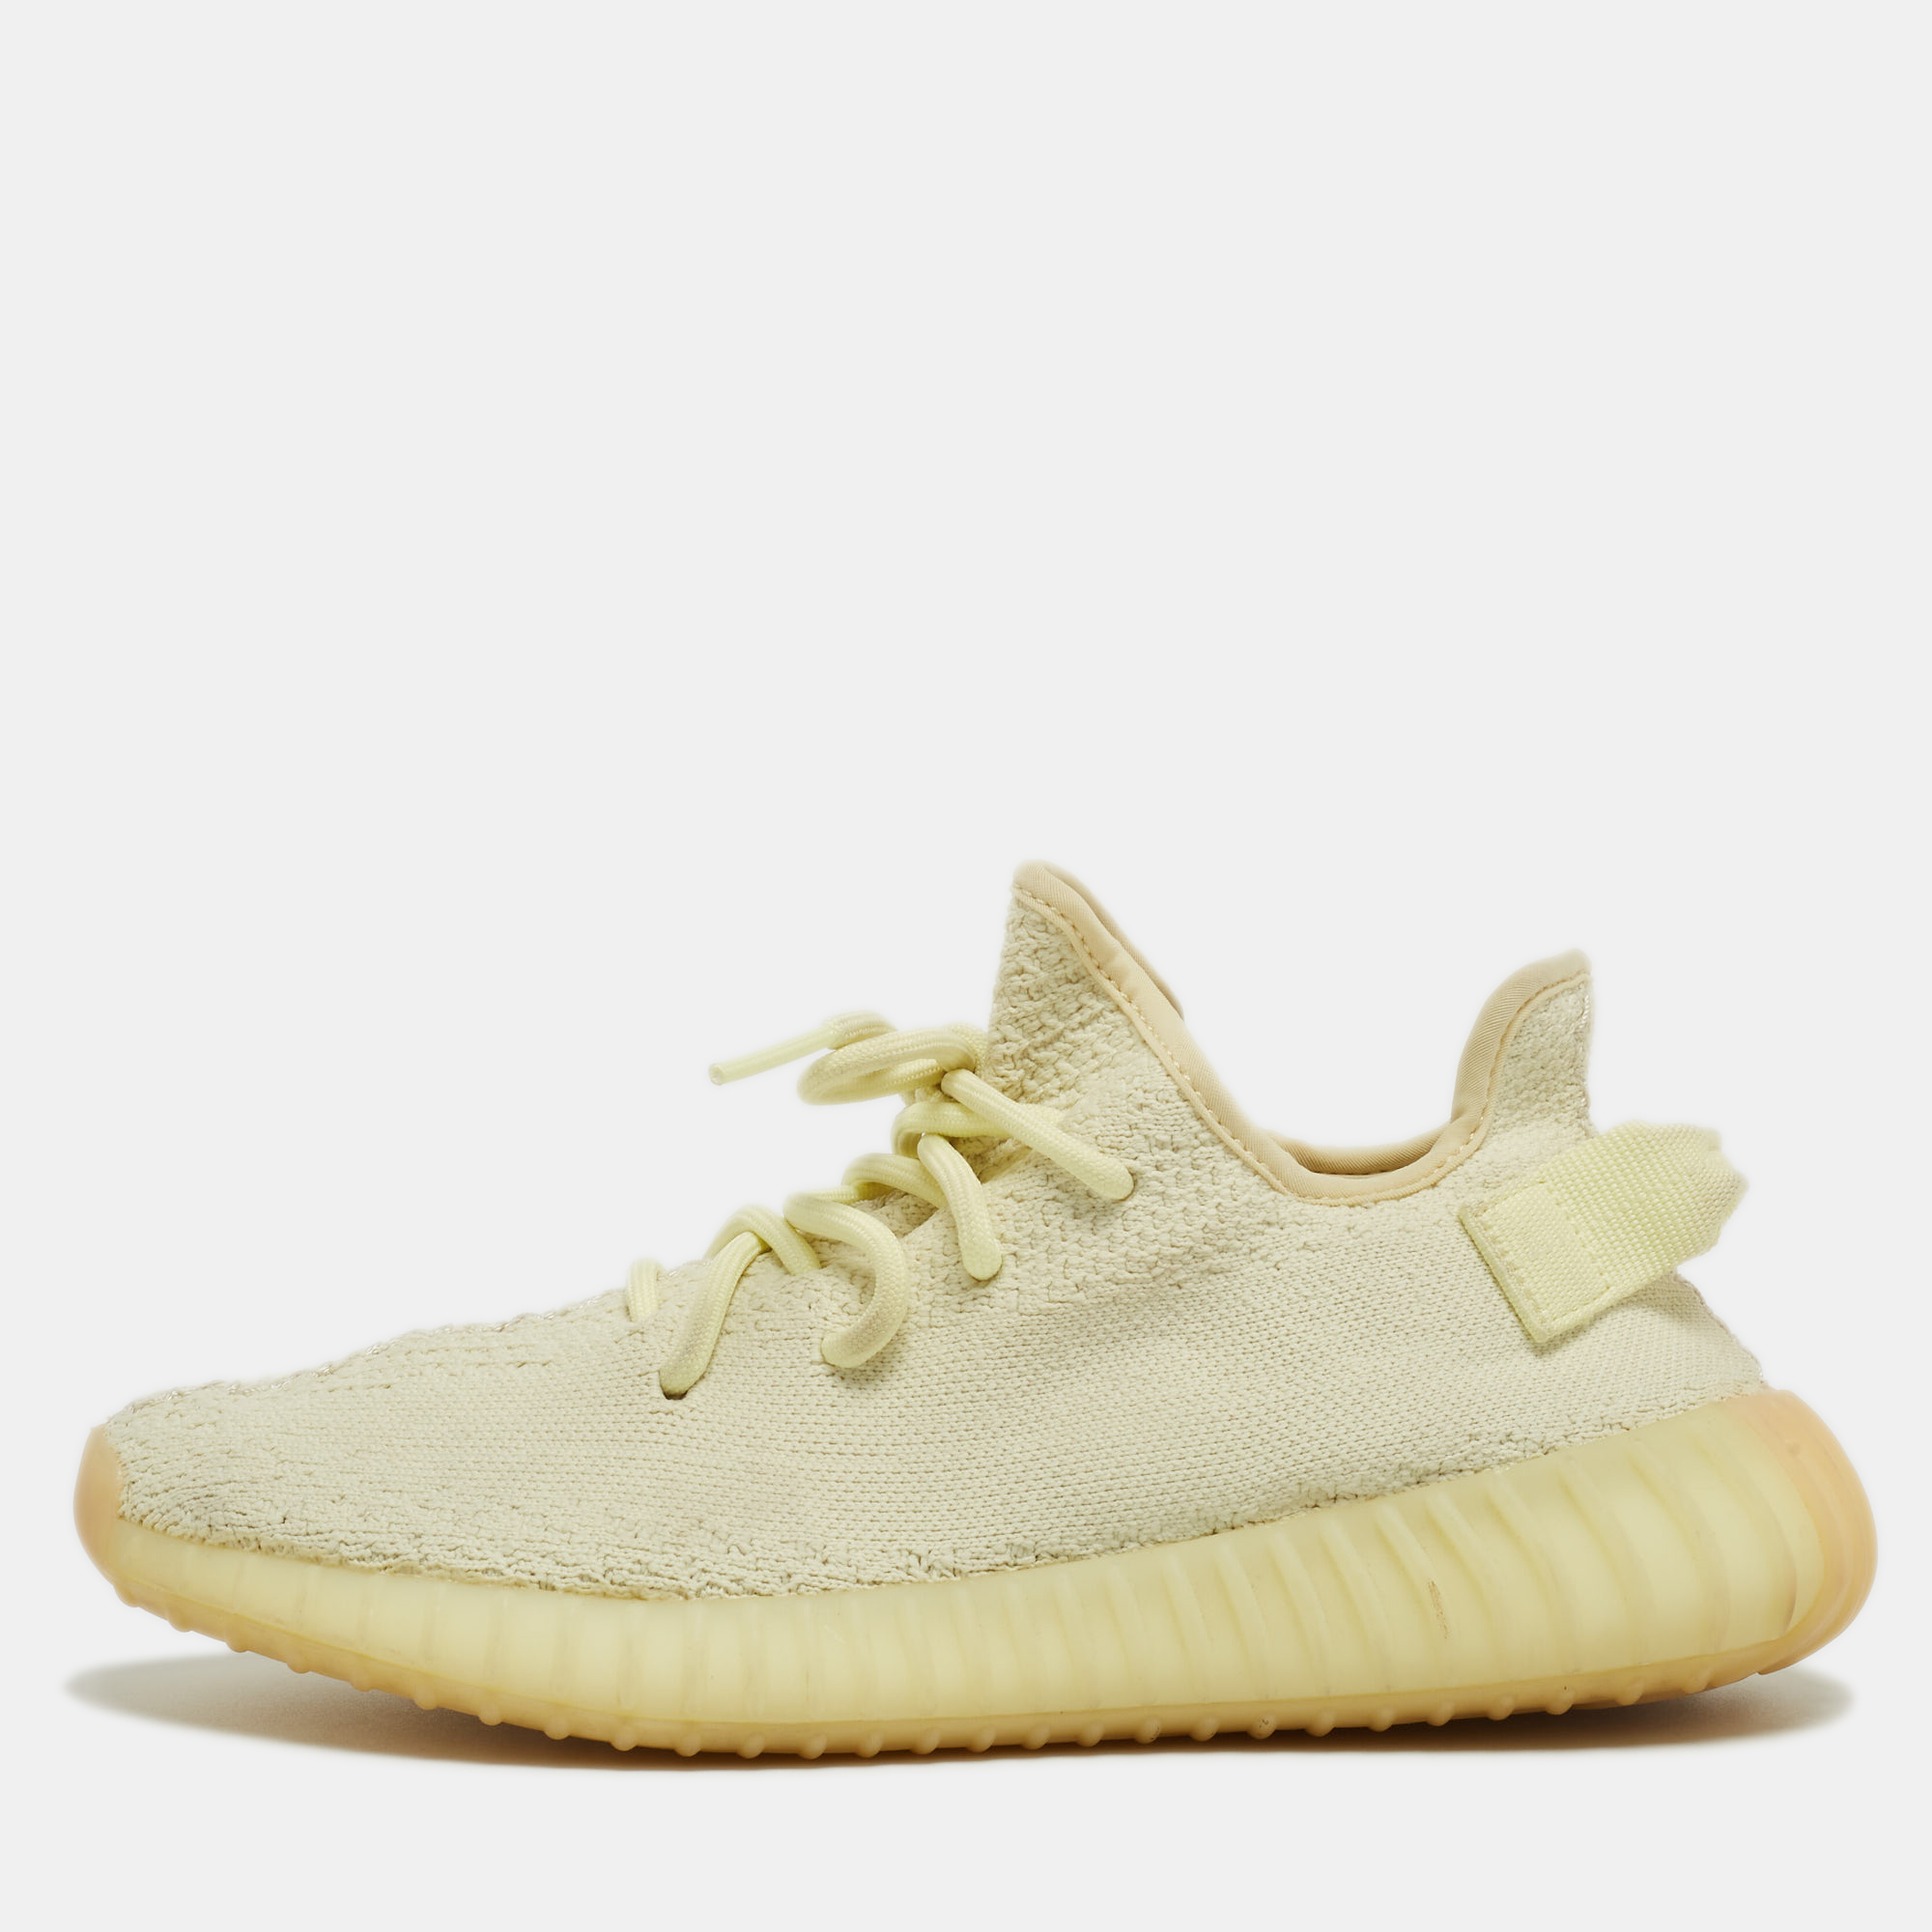 Pre-owned Yeezy X Adidas Light Yellow Knit Fabric Boost 350 V2 Butter Sneakers Size 39 1/3